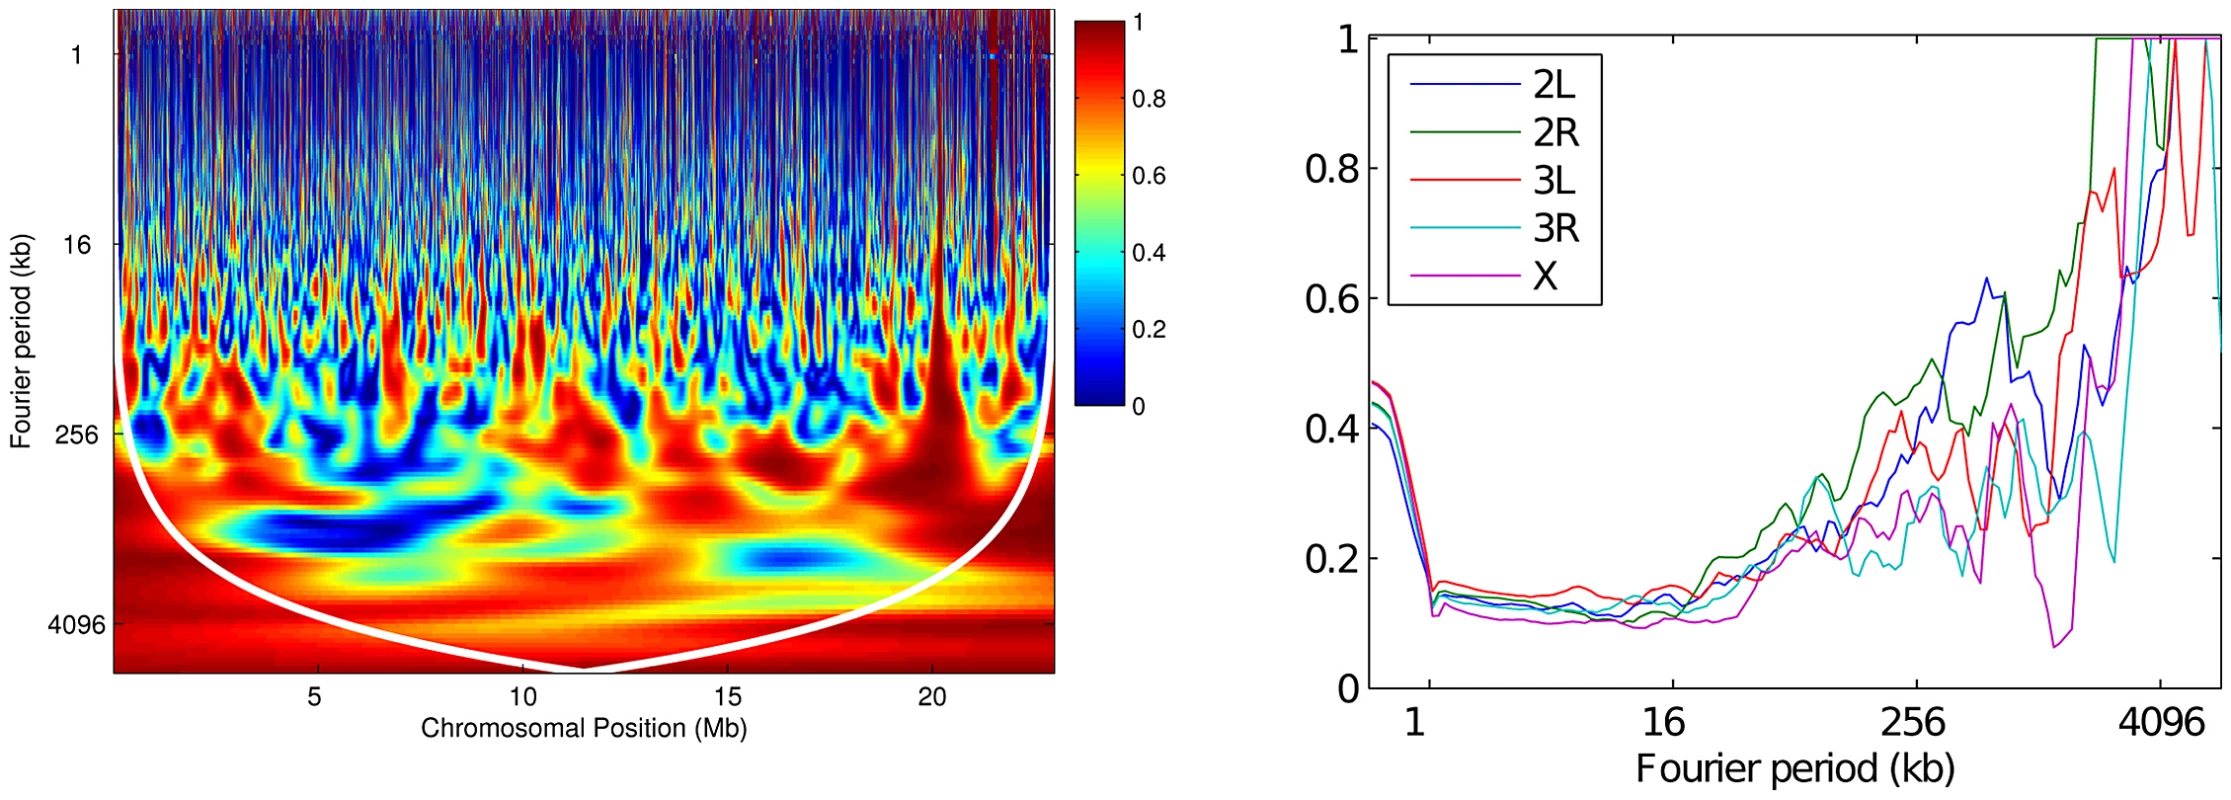 Wavelet coherence analysis comparing RAL against RG.